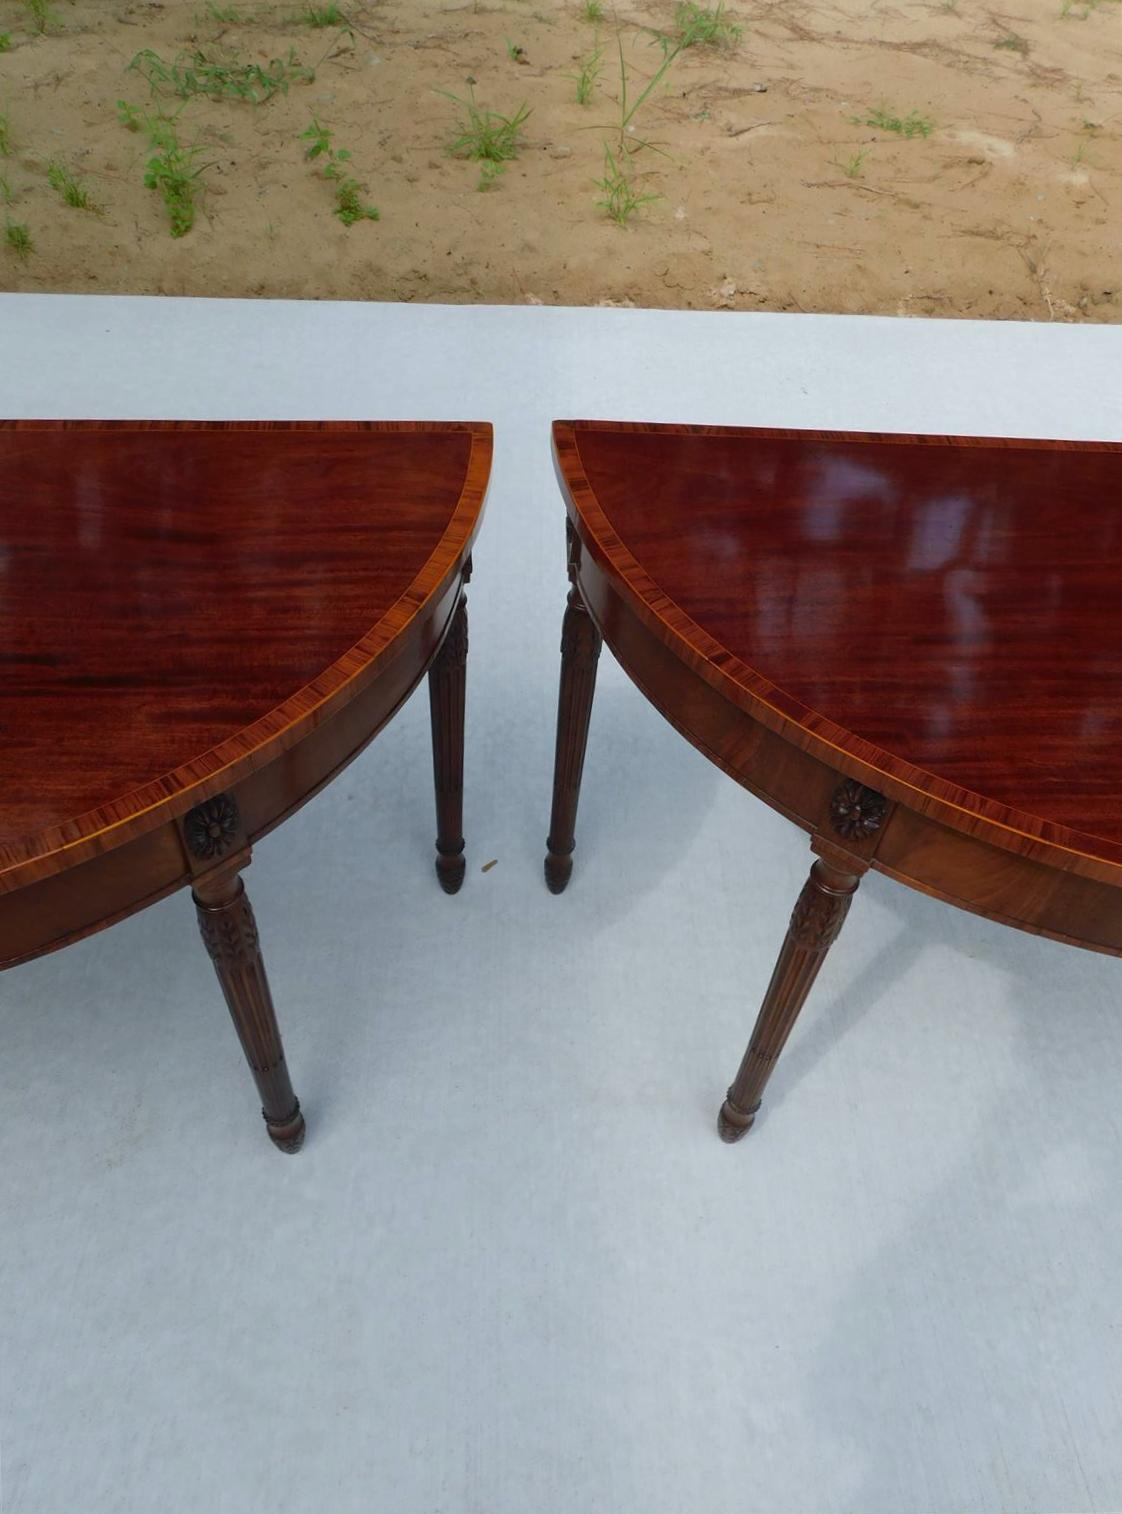 Pair of English Mahogany Demi-lune Consoles w/ Tulip Wood Cross Banding, C. 1780 For Sale 1